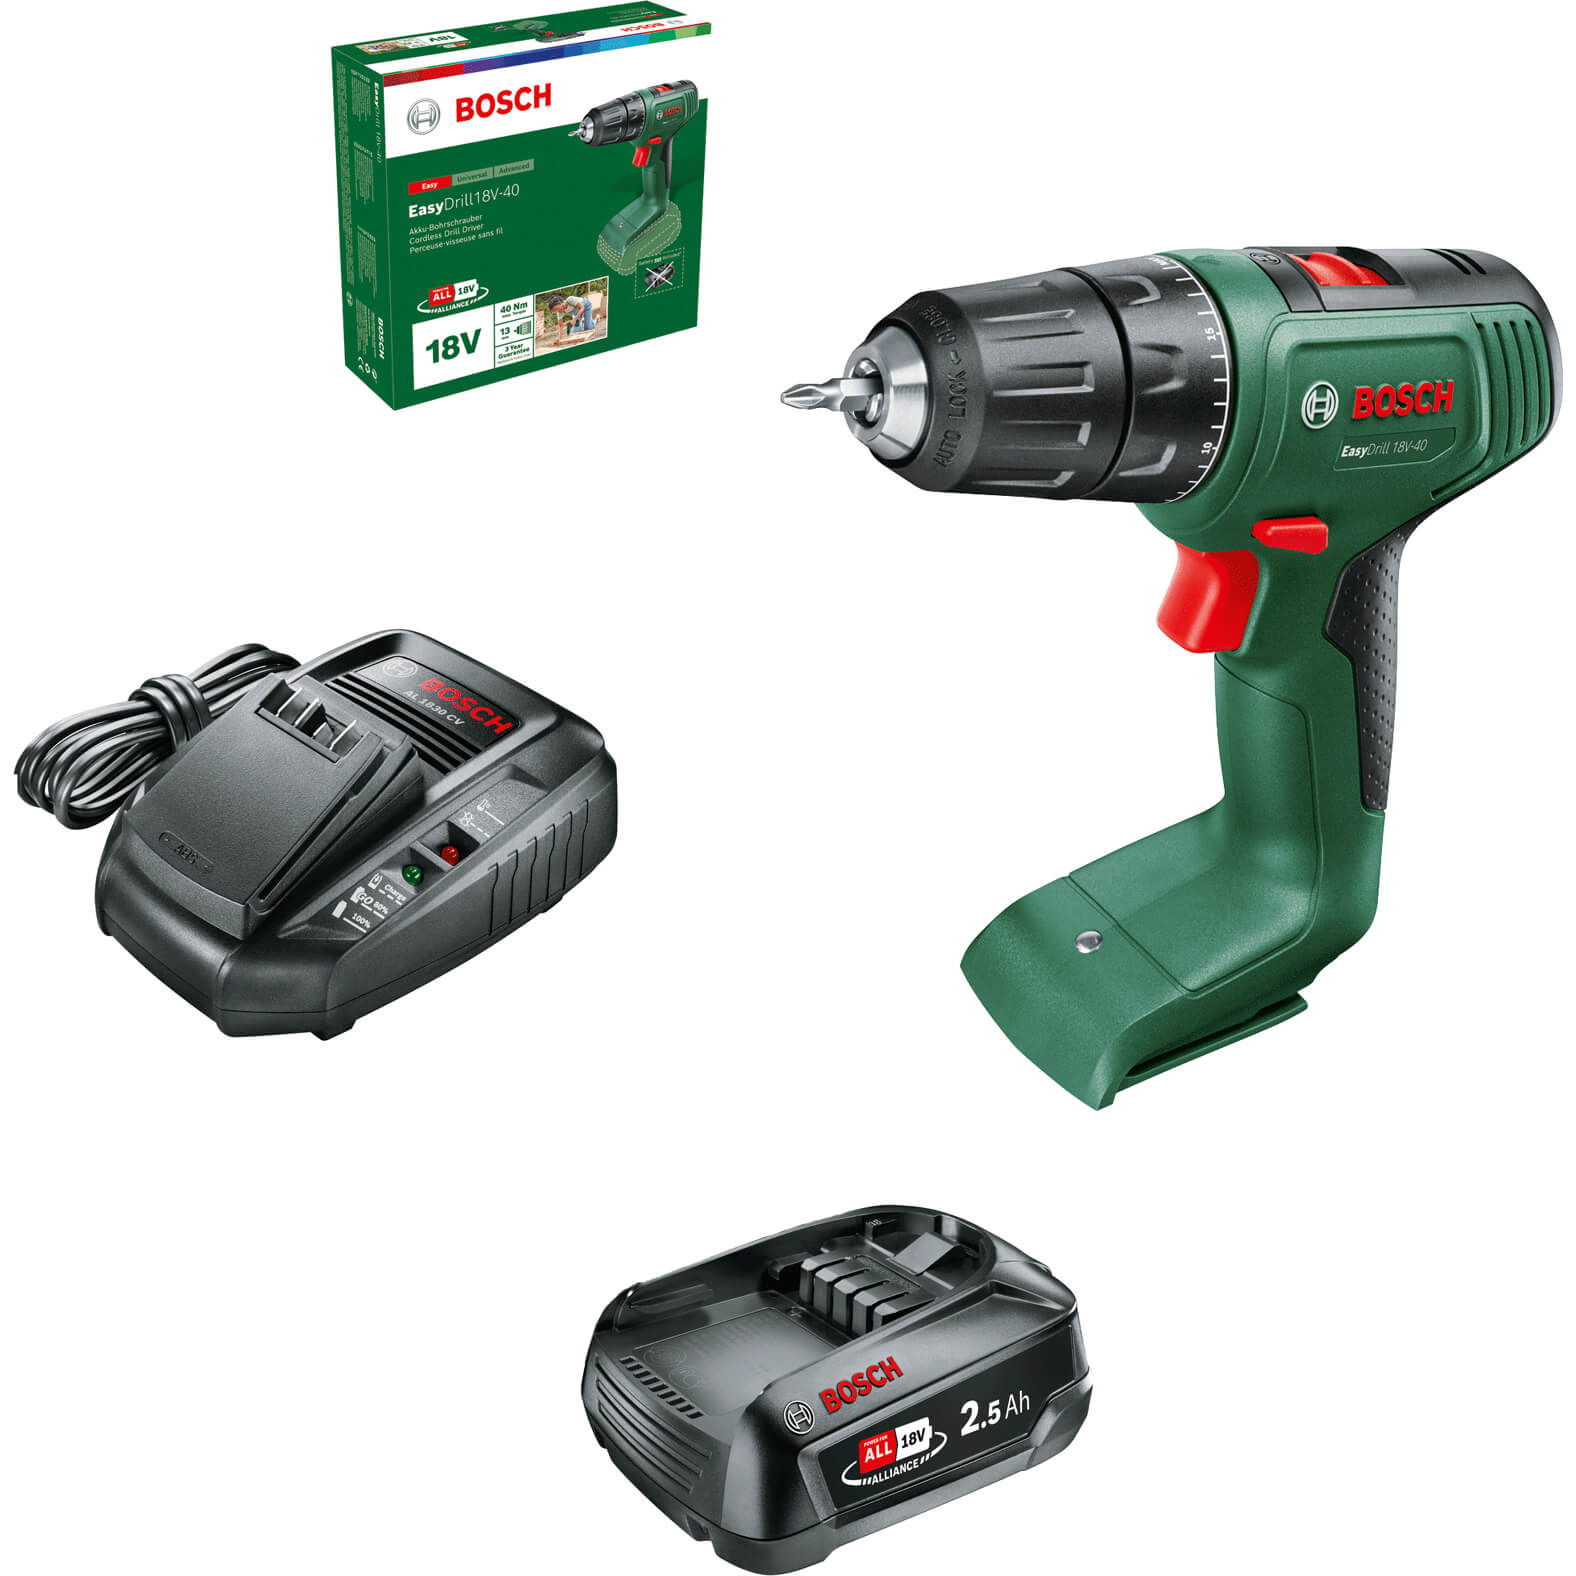 Image of Bosch EASYDRILL 18V-40 18v Cordless Drill Driver 1 x 2.5ah Li-ion Charger No Case